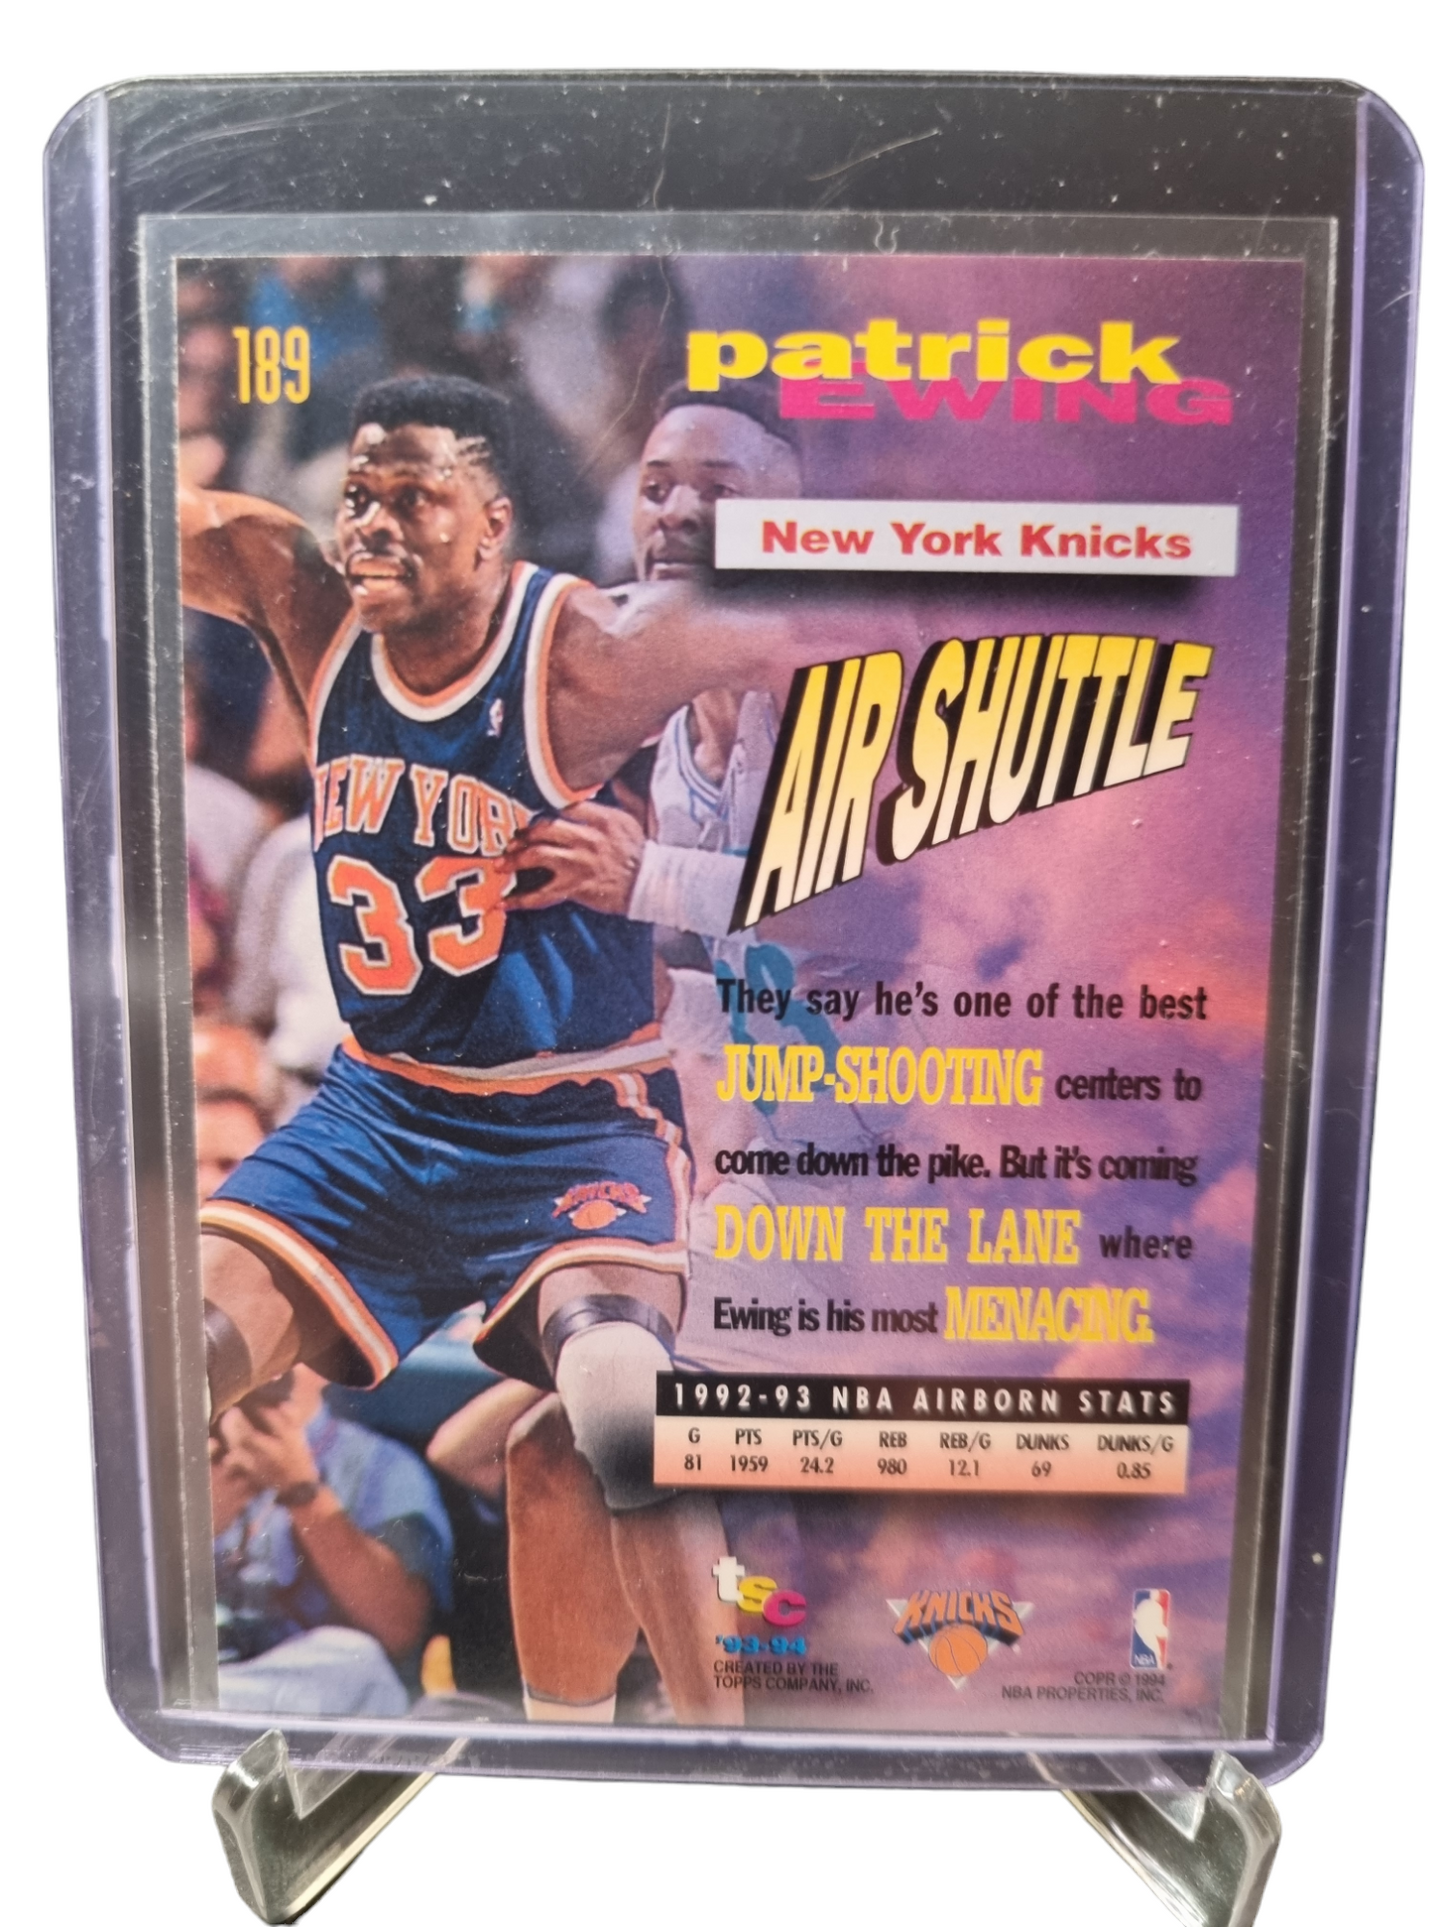 1993-94 Topps Stadium Club #189 Patrick Ewing Frequent Flyers